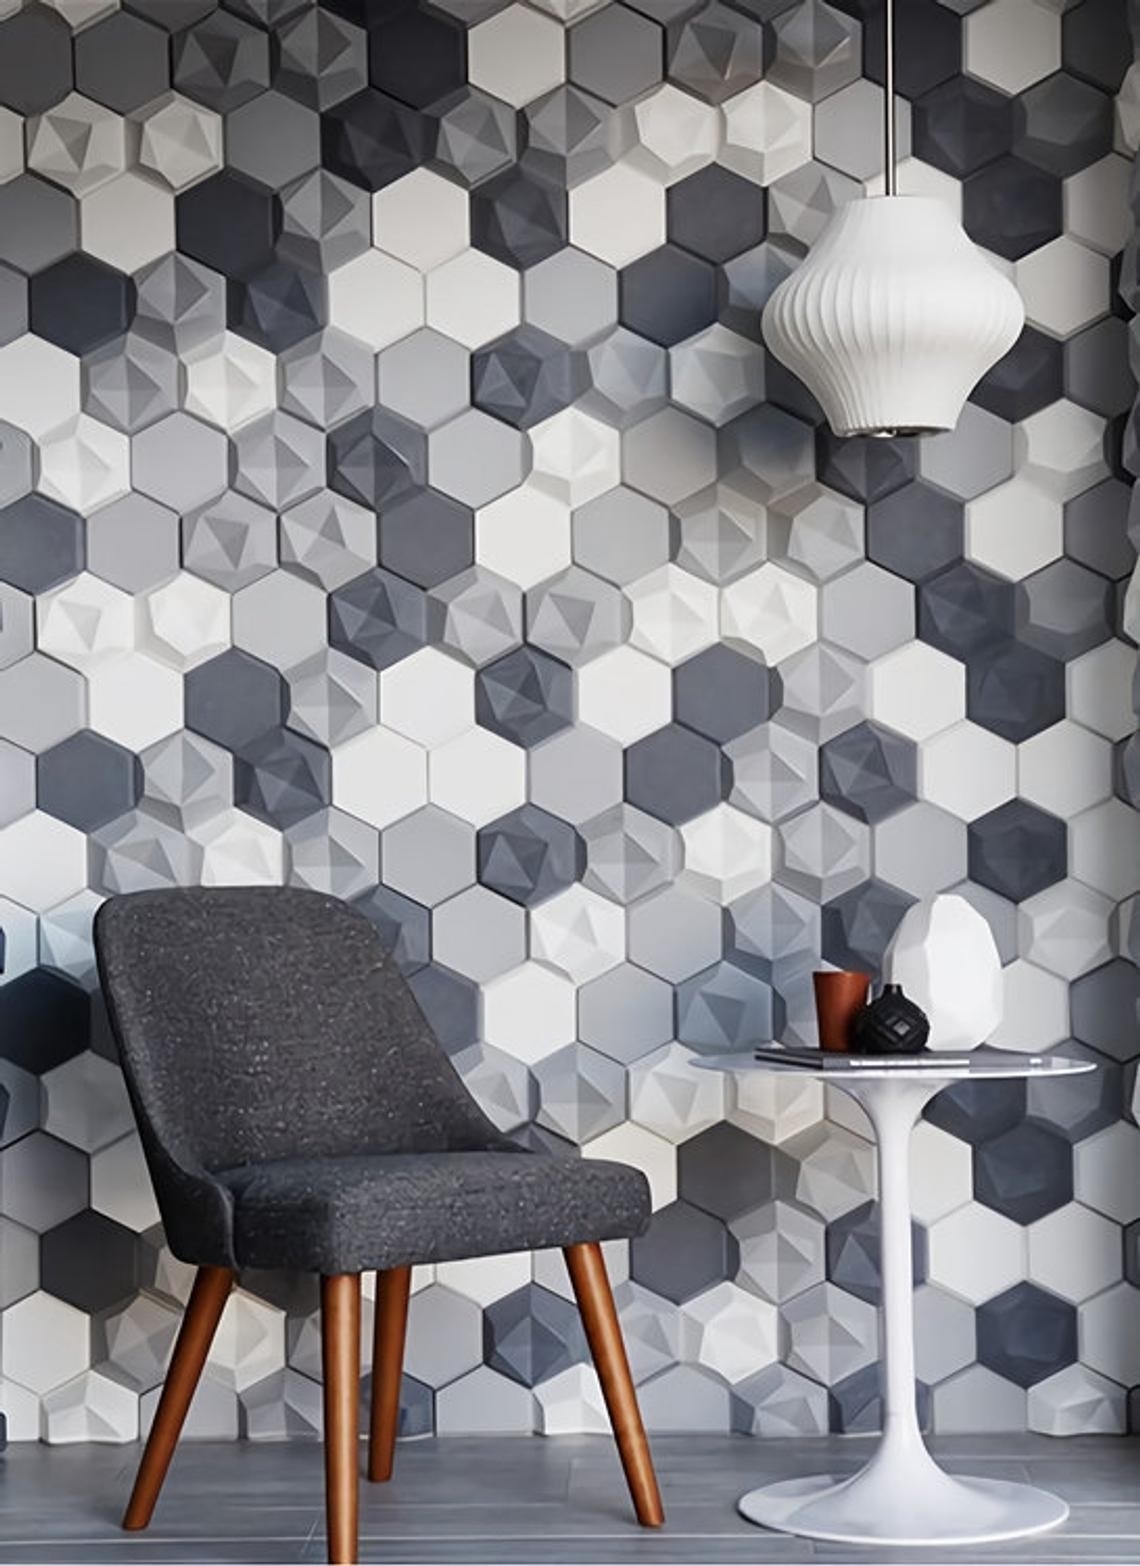 hexagonal tiles in various textures and shades of grey 